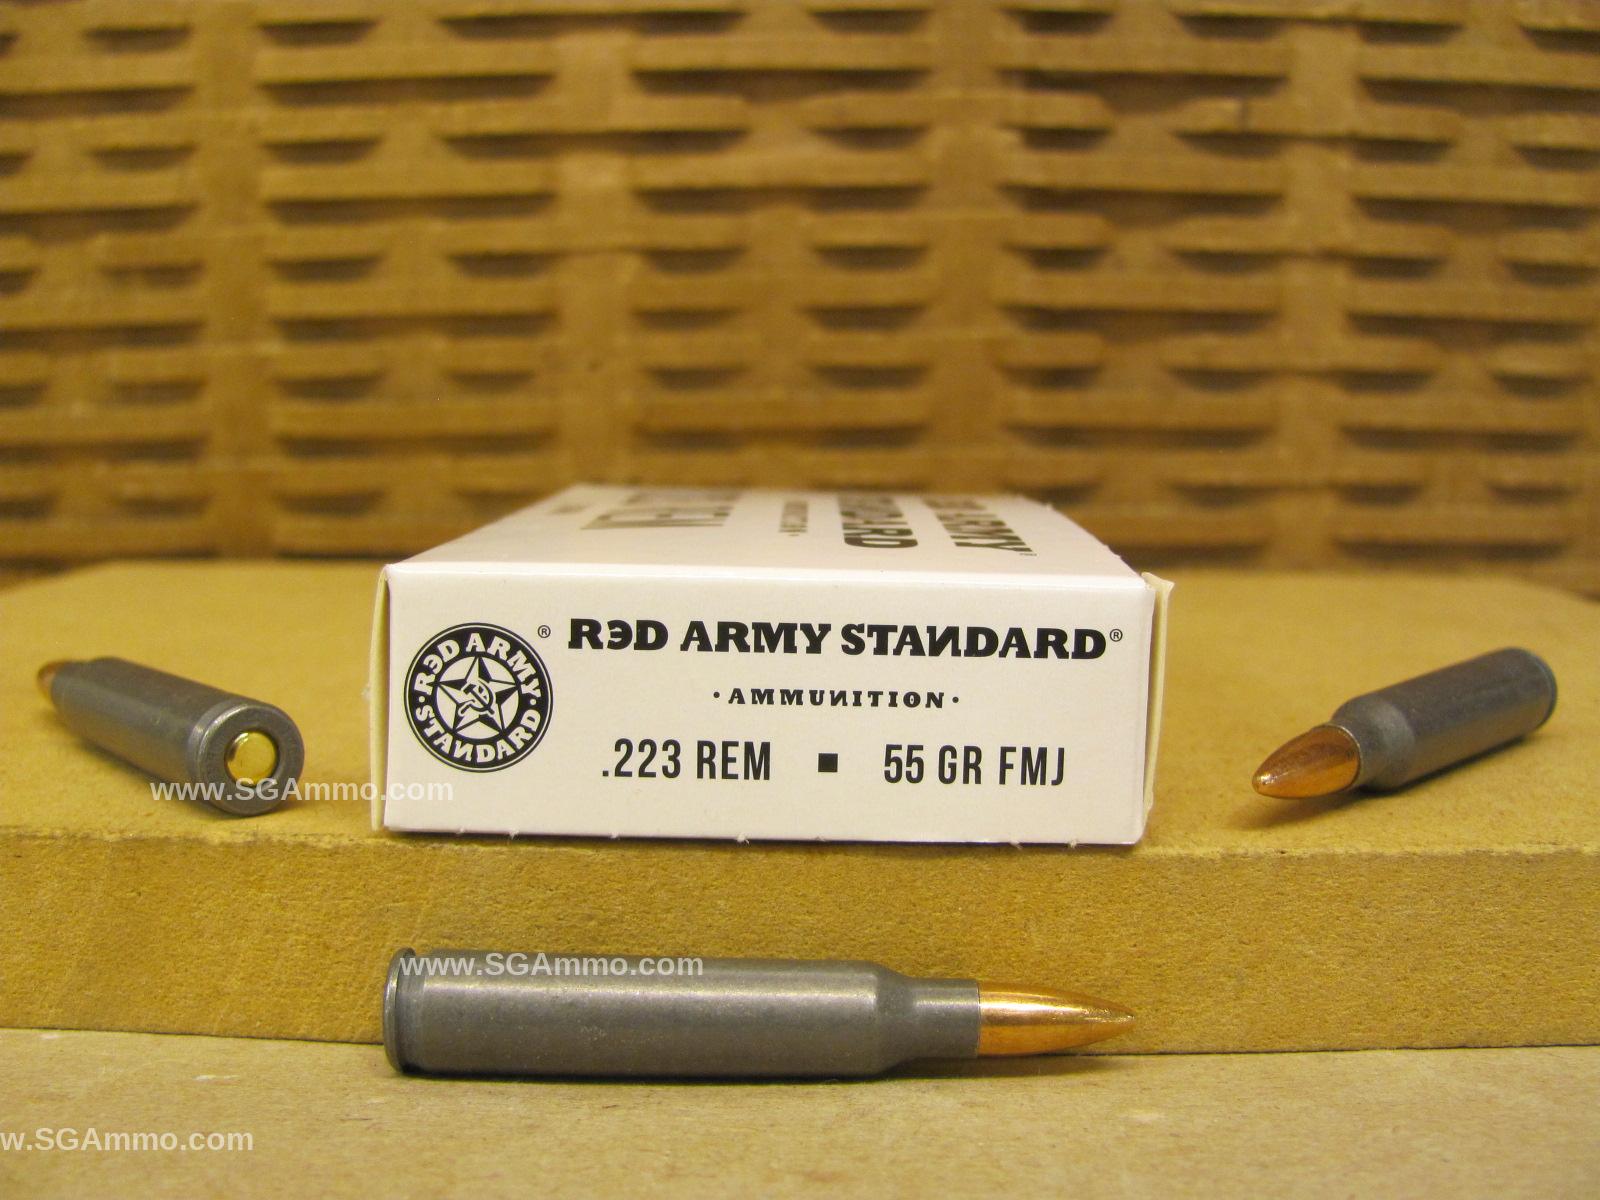 1000 Round Case - 223 Rem 55 Grain FMJ Steel Case Red Army Standard Ammo Made in Russia - AM3089